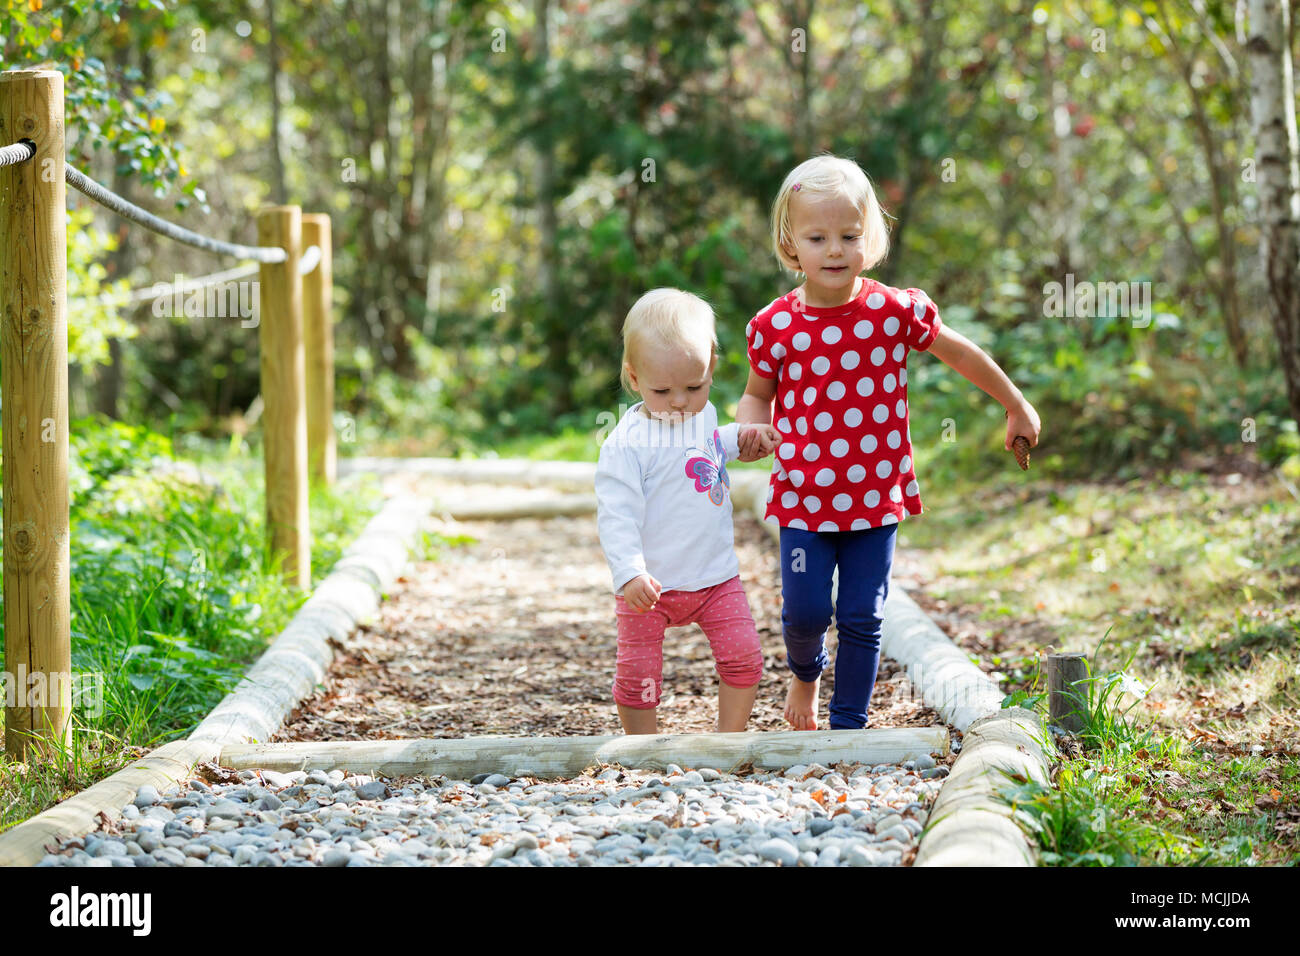 Infants, siblings walking together on a barefoot path, Germany Stock Photo